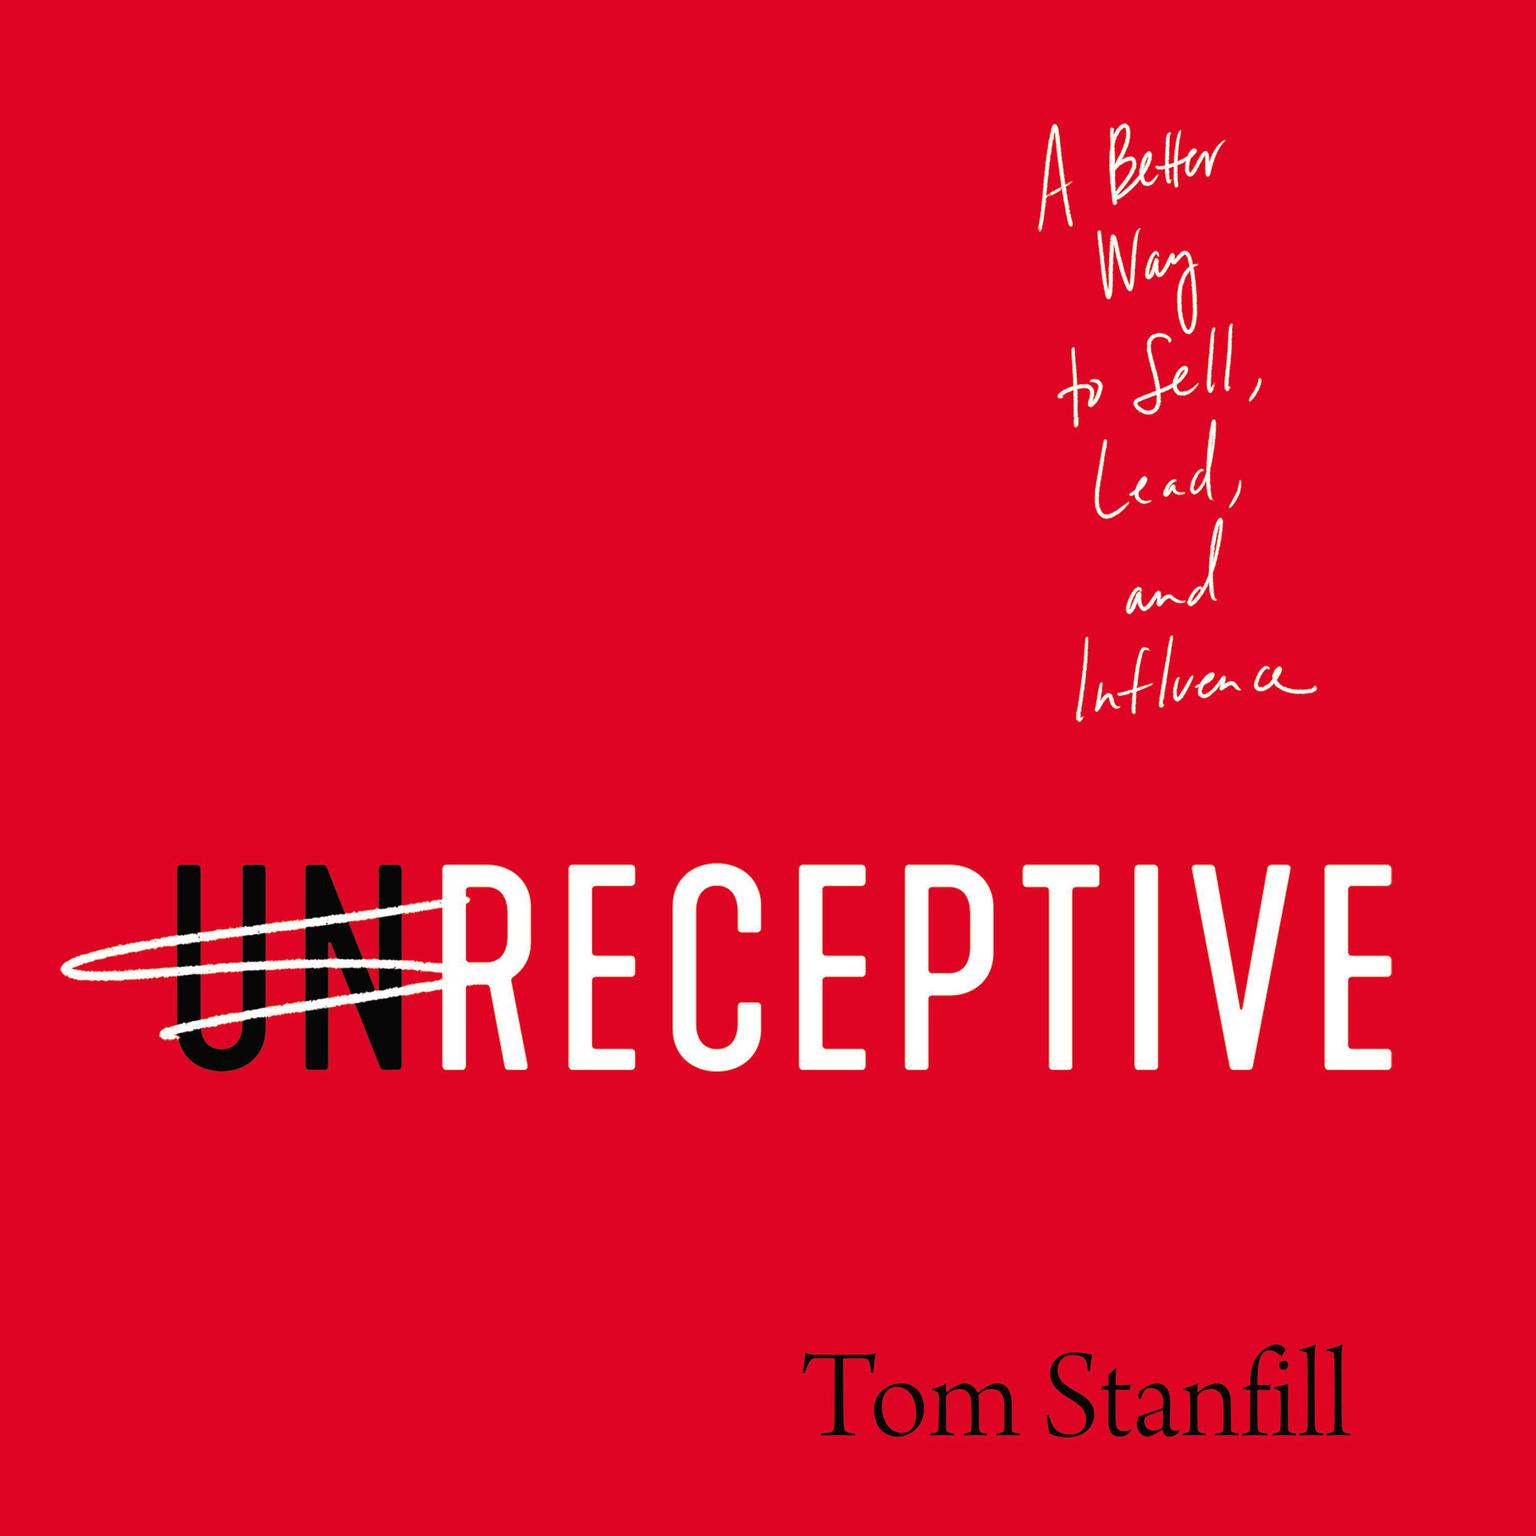 unReceptive: A Better Way to Sell, Lead, and Influence Audiobook, by Tom Stanfill